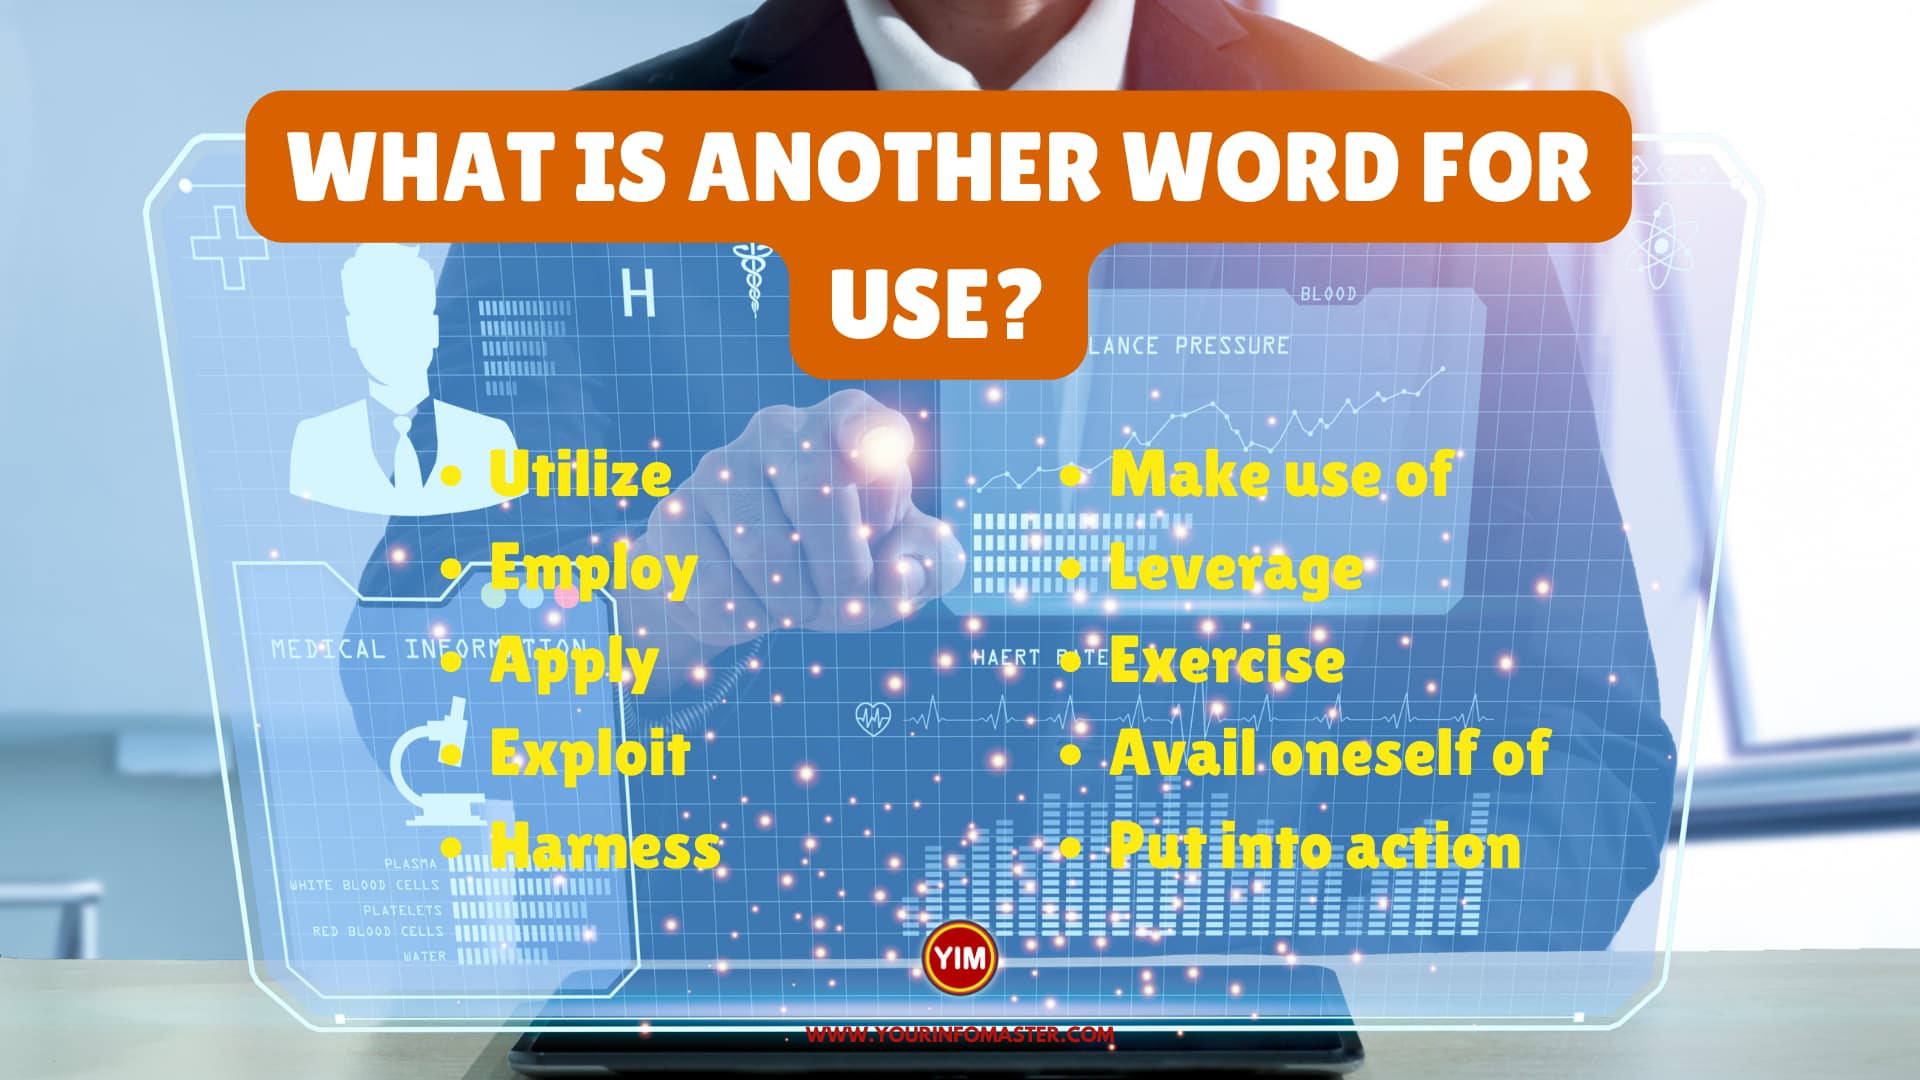 What is another word for Use